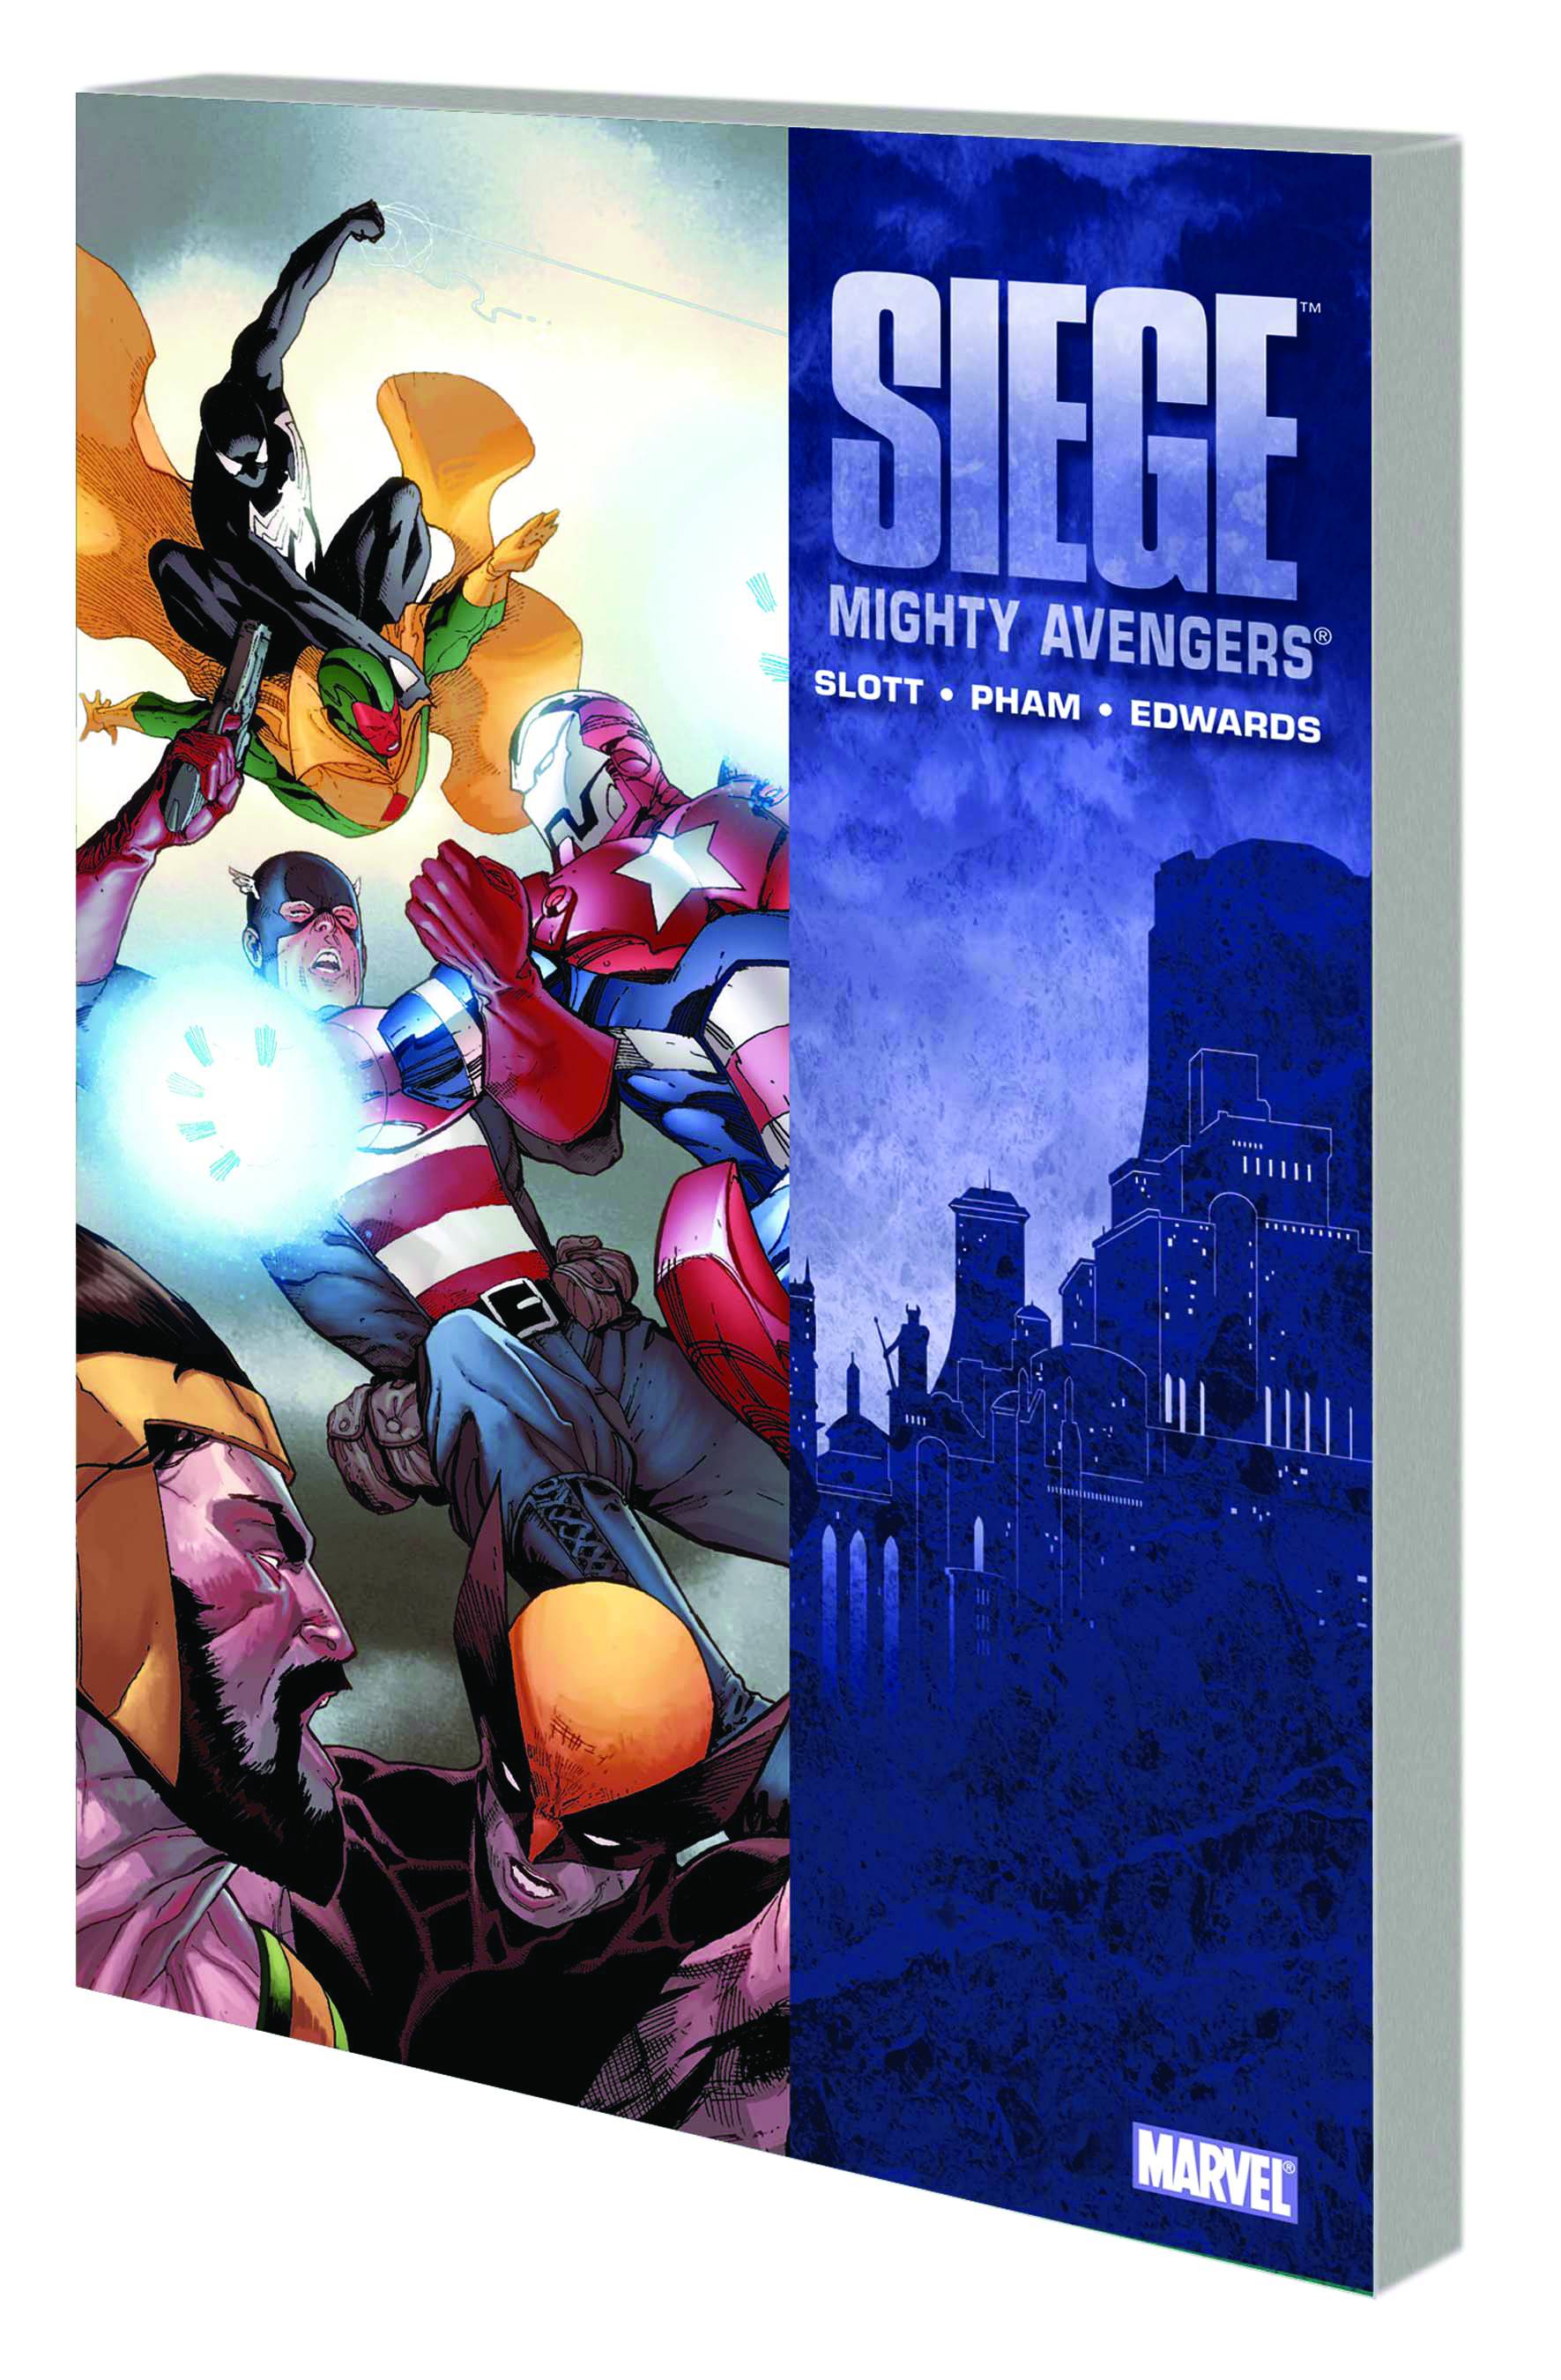 Siege Mighty Avengers Graphic Novel